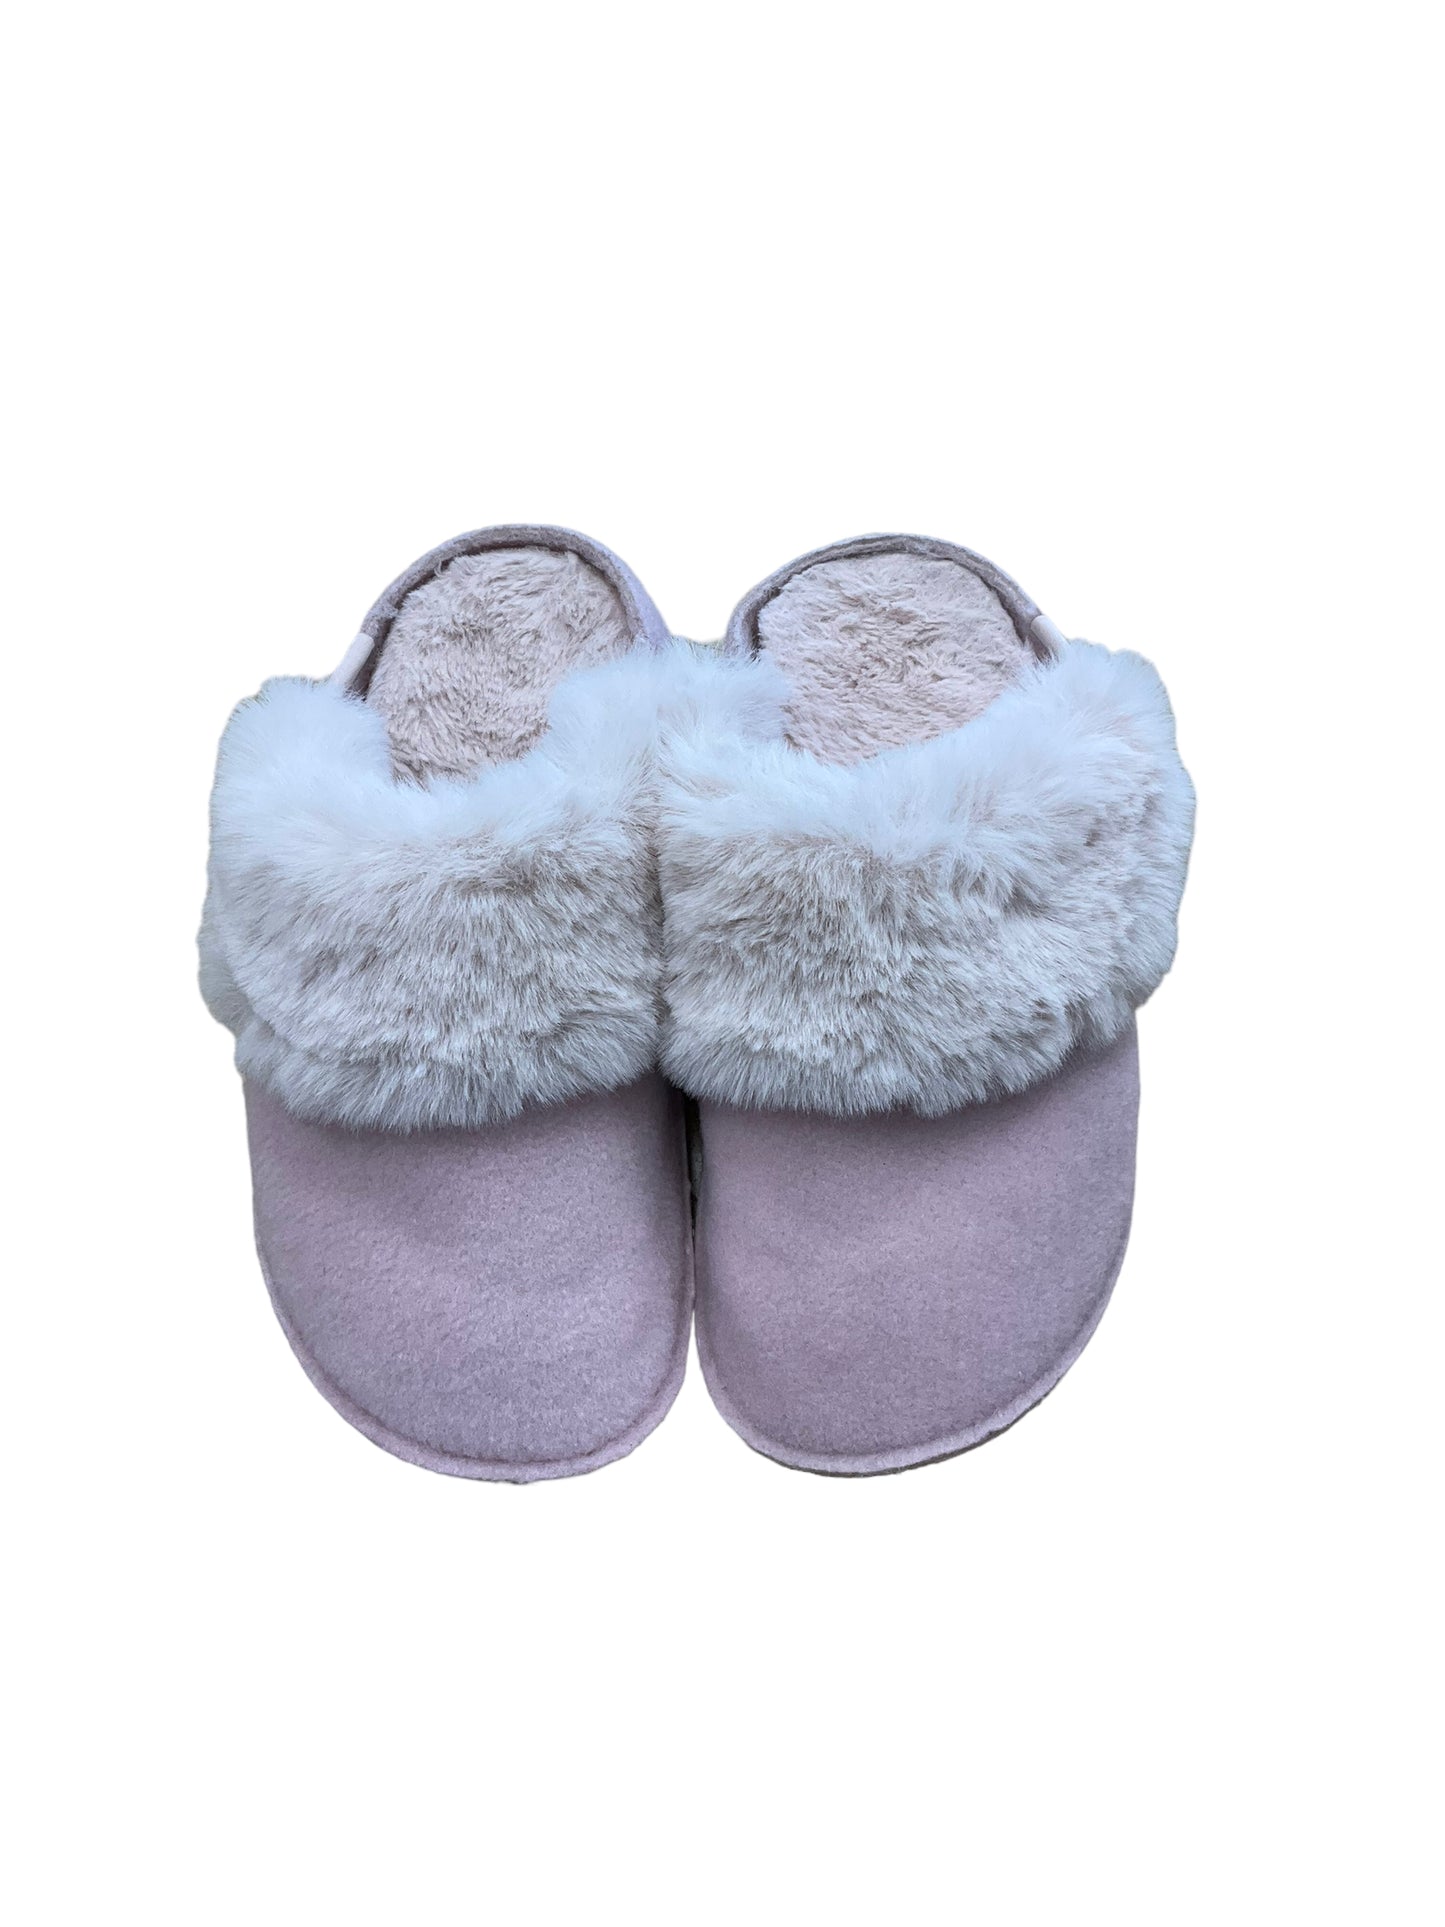 Slippers By Crocs  Size: 8